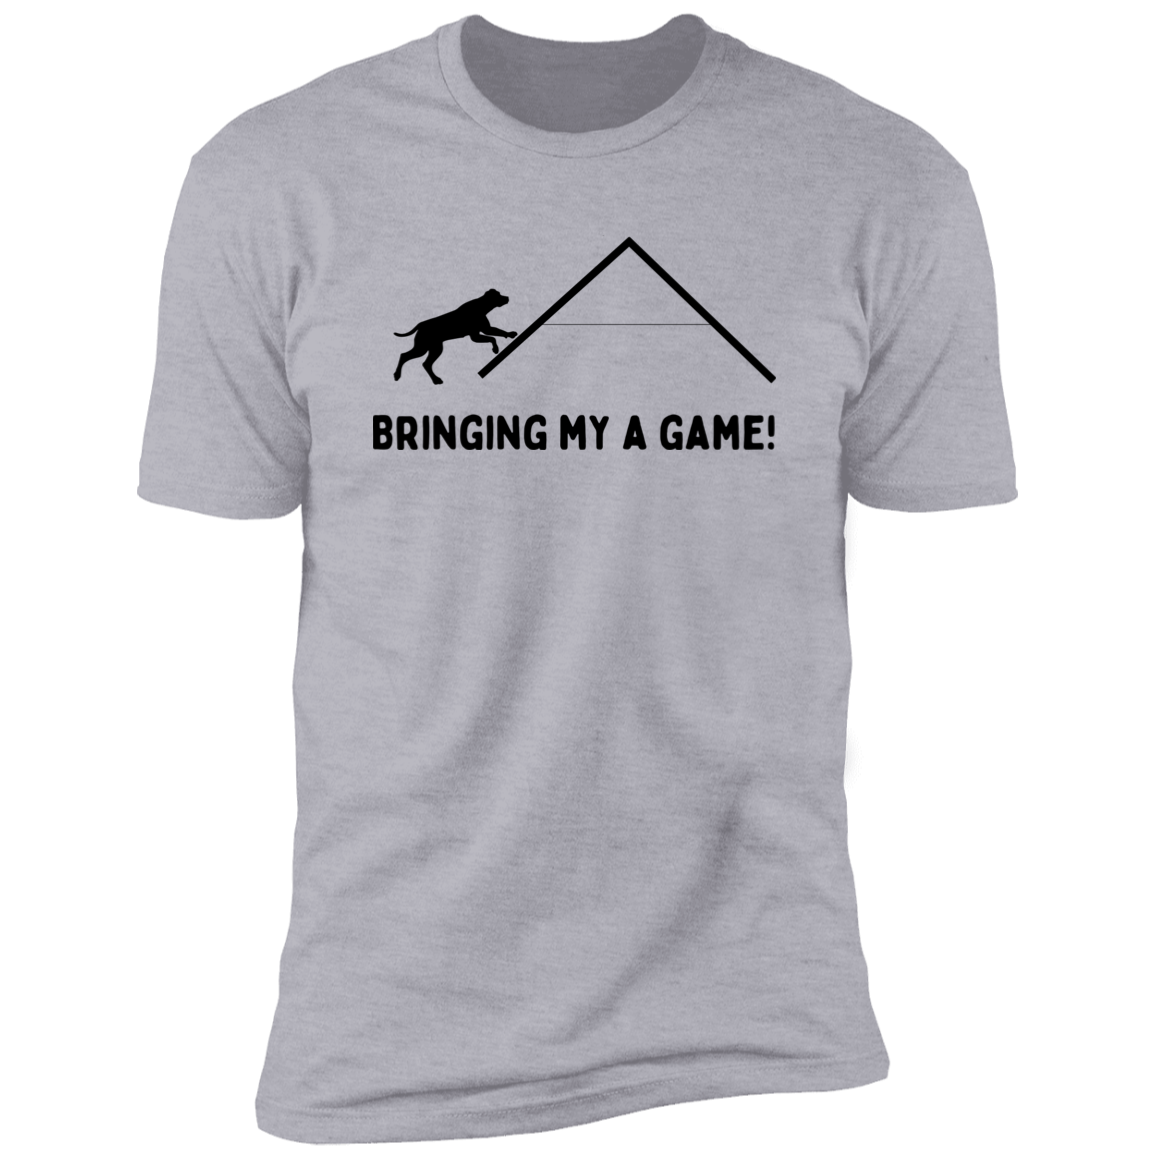 Bringing My A Game Agility T-shirt, Dog Agility Shirt for humans, in light heather gray